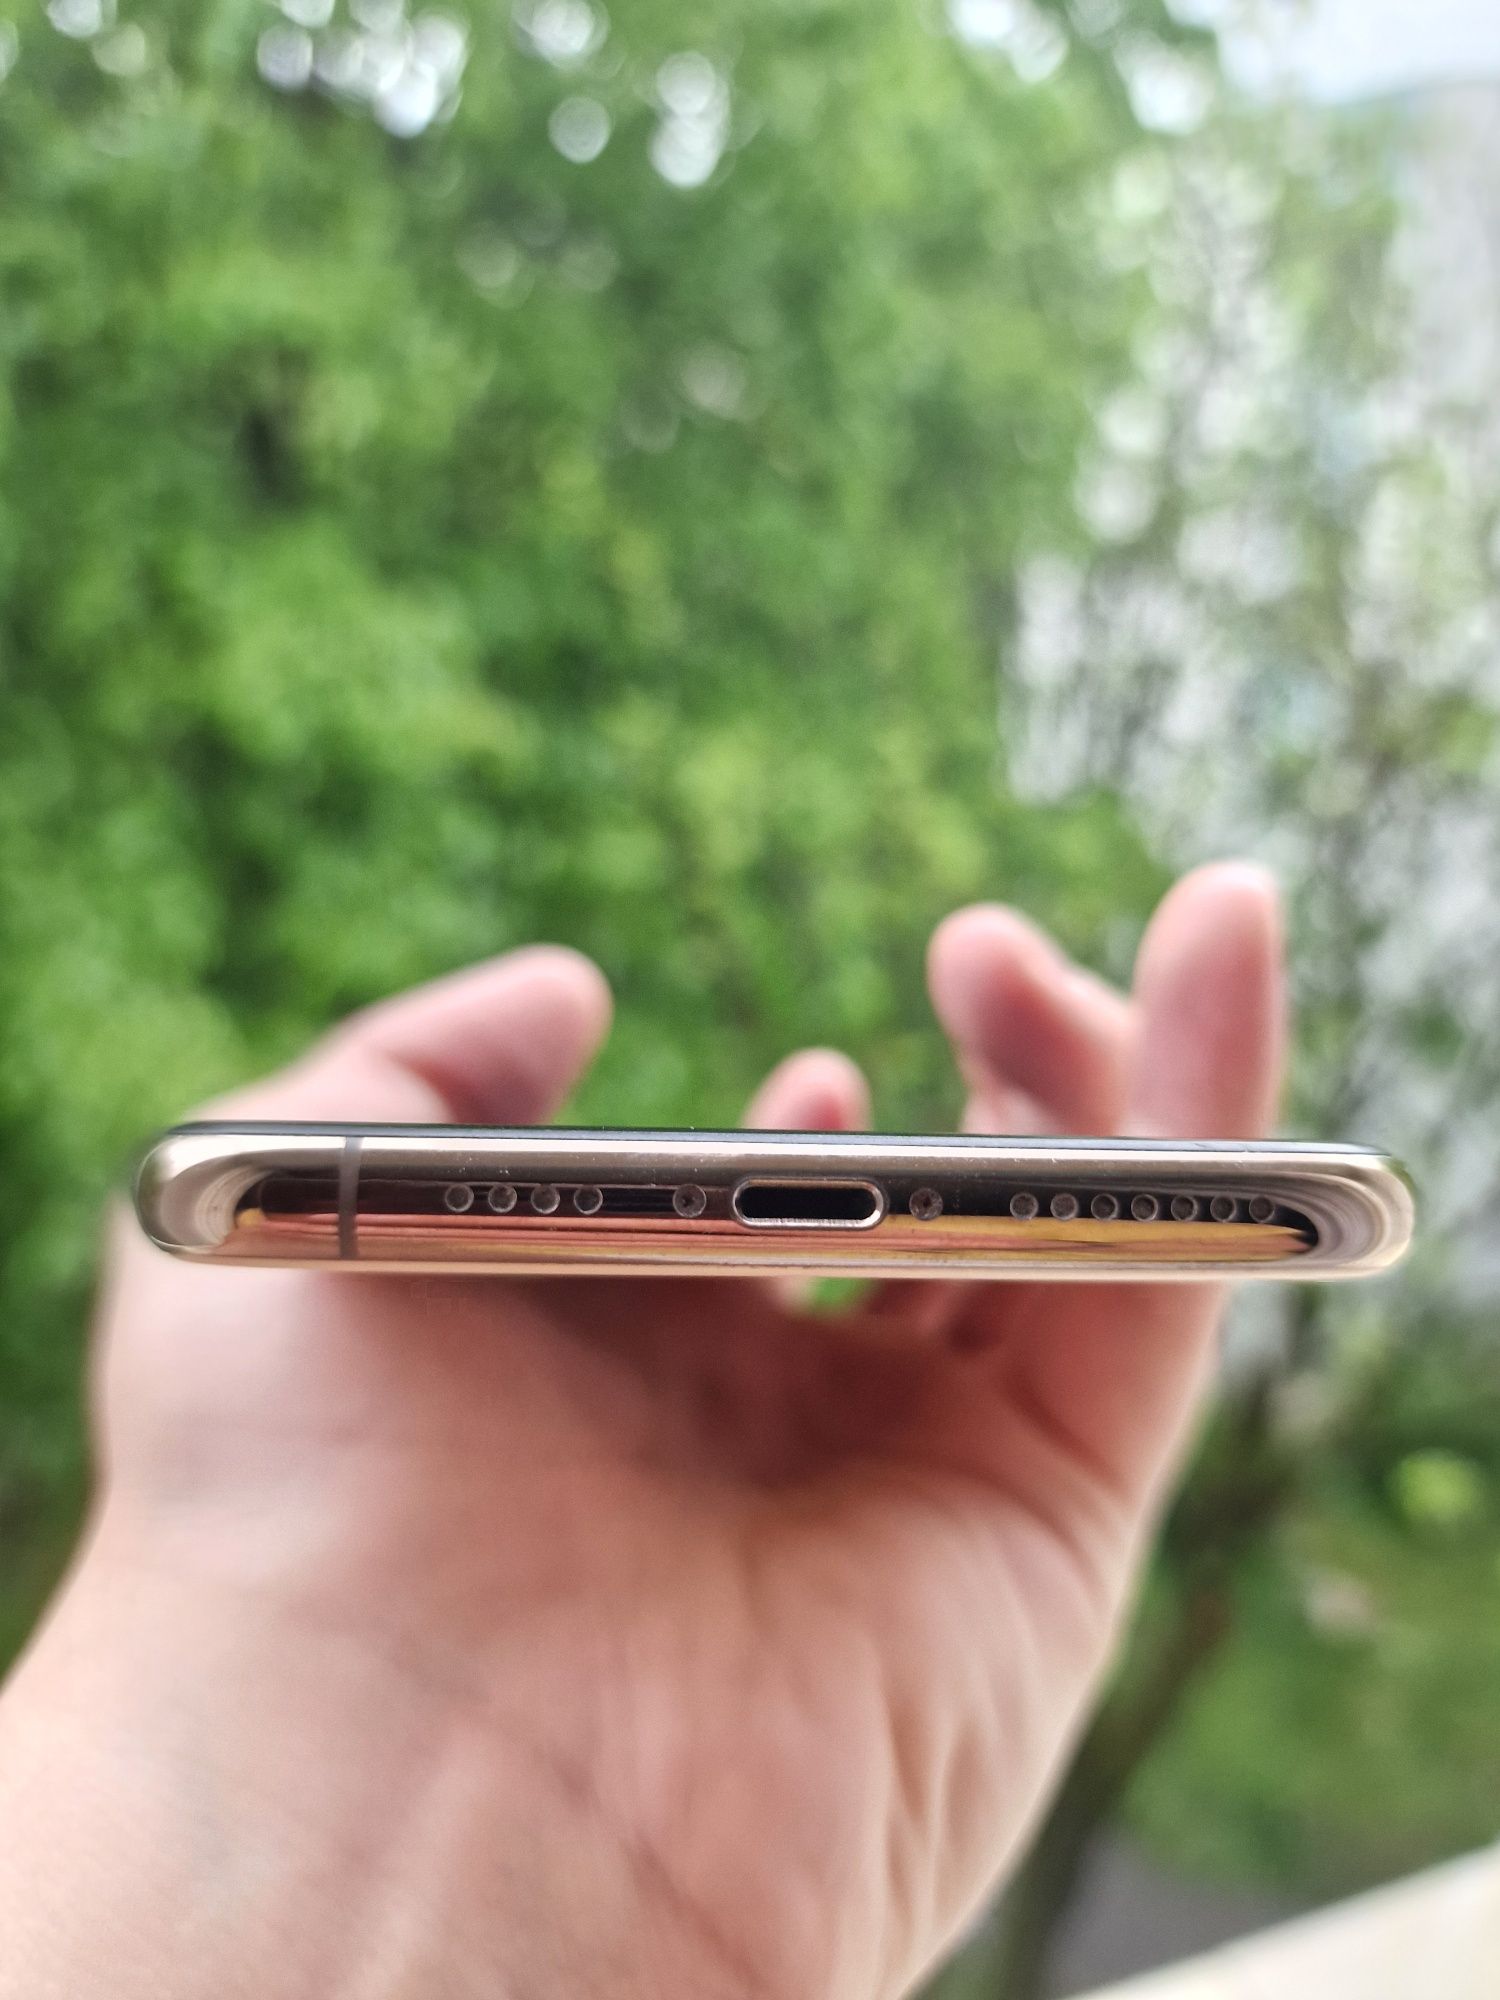 Iphone 11 PRO MAX Gold